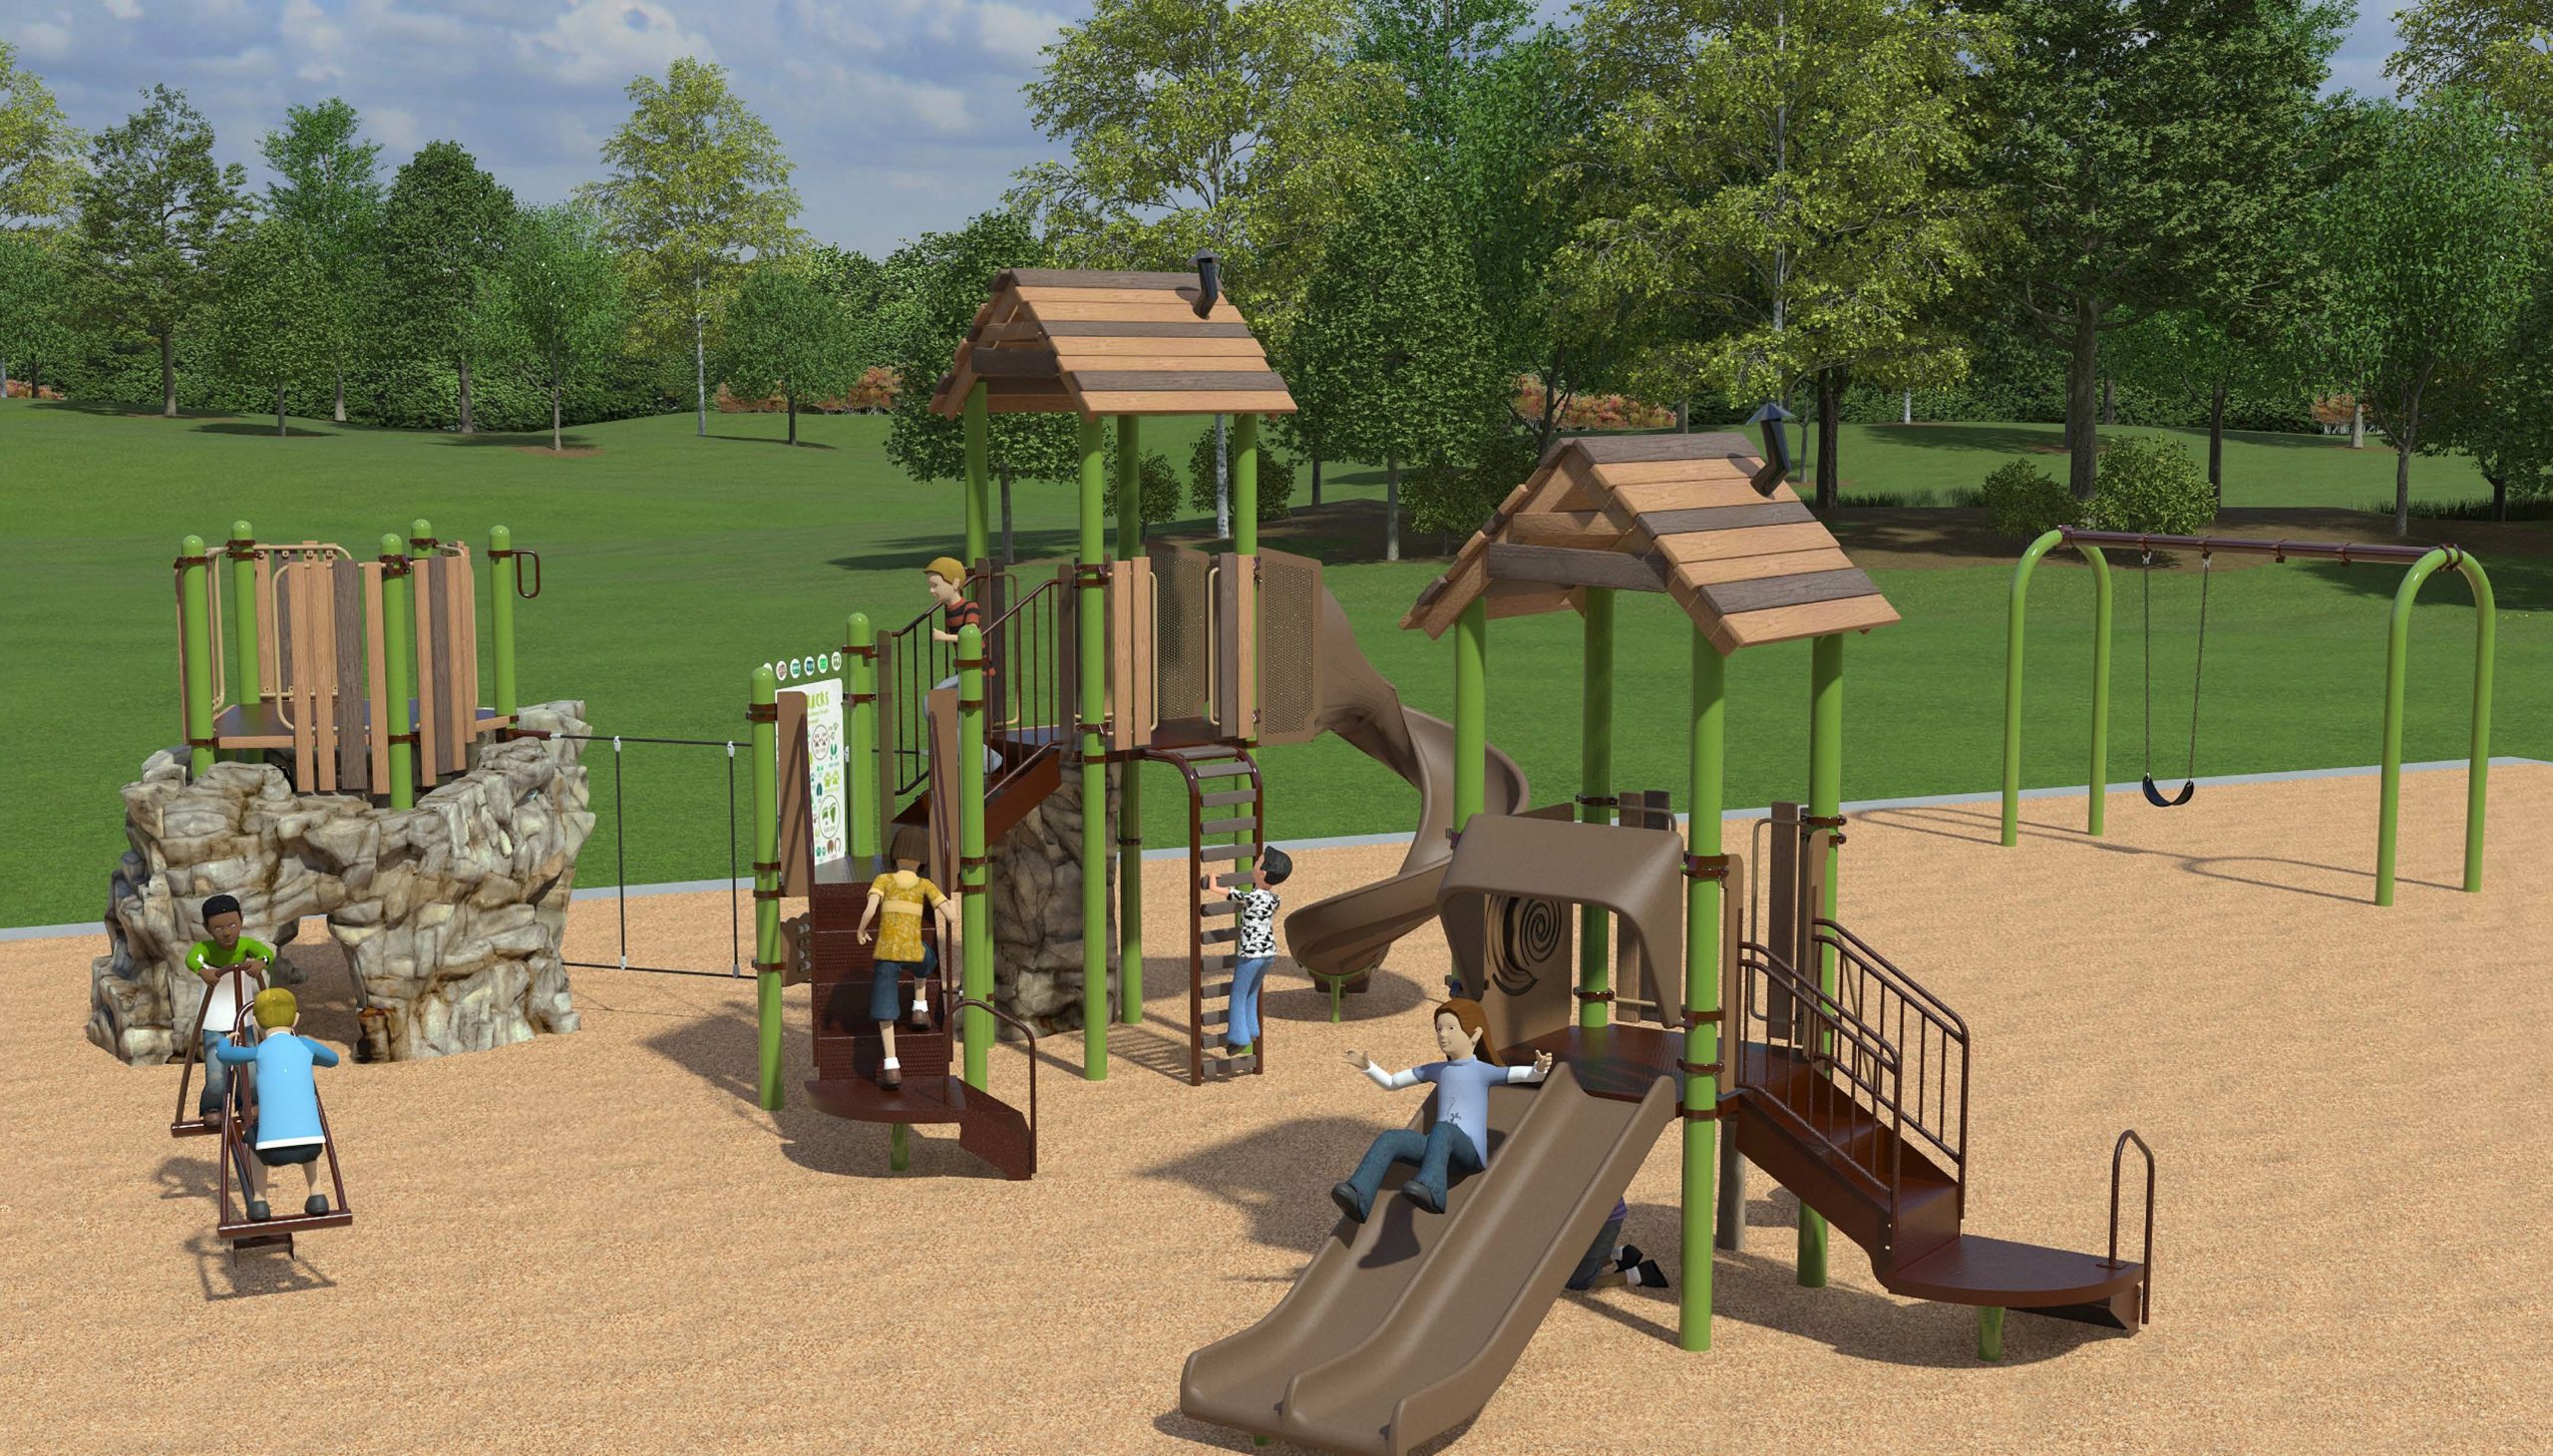 Rendering of the new playground including swings, a senior play structure, junior play structure, a spinner toy and a seesaw.